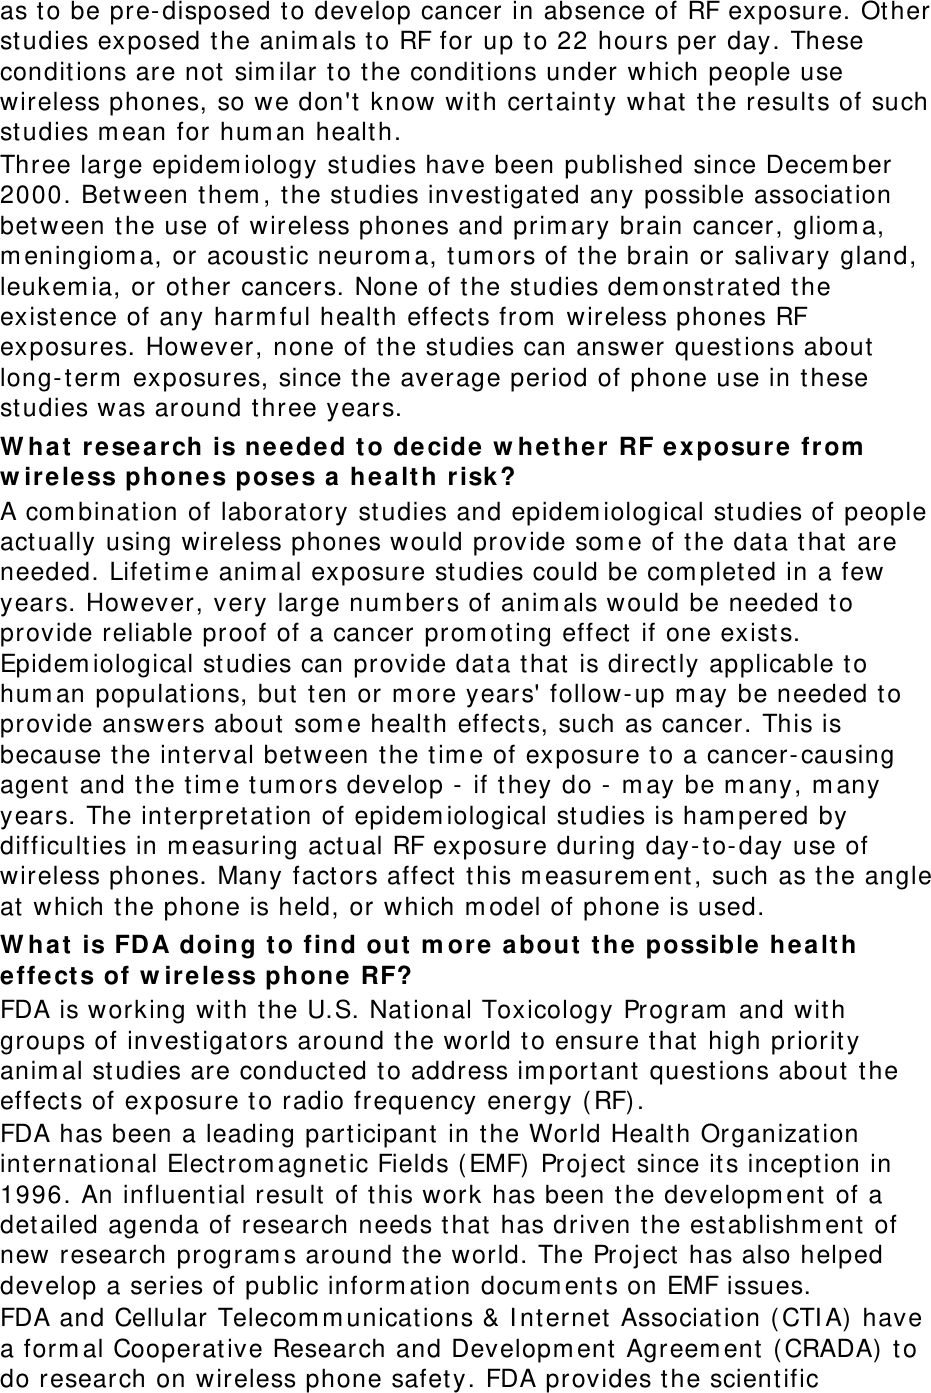 as to be pre- disposed to develop cancer in absence of RF exposure. Ot her studies exposed the anim als to RF for up to 22 hours per day. These condit ions are not sim ilar t o t he condit ions under which people use wireless phones, so we don&apos;t  know wit h certainty what  t he result s of such studies m ean for hum an health. Three large epidem iology studies have been published since Decem ber 2000. Bet ween t hem , t he studies invest igat ed any possible association bet ween t he use of wireless phones and prim ary brain cancer, gliom a, m eningiom a, or acoust ic neurom a, t um ors of t he brain or salivary gland, leukem ia, or other cancers. None of t he st udies dem onst rat ed the exist ence of any harm ful healt h effect s from  wireless phones RF exposures. However, none of t he st udies can answer questions about long- t erm  exposures, since t he average period of phone use in t hese studies was around t hree years. W h a t  r e se a rch is needed t o decide w het her RF ex posure from  w ire le ss phones pose s a hea lt h risk ? A com binat ion of laborat ory st udies and epidem iological st udies of people act ually using wireless phones would provide som e of t he dat a t hat  are needed. Lifetim e anim al exposure st udies could be com plet ed in a few years. However, very large num bers of anim als would be needed t o provide reliable proof of a cancer prom ot ing effect if one exist s. Epidem iological st udies can provide dat a that  is direct ly applicable t o hum an populat ions, but t en or m ore years&apos; follow- up m ay be needed to provide answers about som e healt h effect s, such as cancer. This is because t he interval between t he t im e of exposure t o a cancer-causing agent  and the t im e t um ors develop -  if t hey do -  m ay be m any, m any years. The int erpret at ion of epidem iological st udies is ham pered by difficult ies in m easuring act ual RF exposure during day-t o- day use of wireless phones. Many factors affect  t his m easurem ent , such as t he angle at which t he phone is held, or which m odel of phone is used. W h a t  is FDA doing t o find out  m or e  a bout  t h e  possible healt h effect s of w ireless phone RF? FDA is working wit h t he U.S. Nat ional Toxicology Program  and wit h groups of investigat ors around t he world to ensure t hat  high priorit y anim al st udies are conduct ed t o address im port ant questions about t he effects of exposure t o radio frequency energy ( RF) . FDA has been a leading part icipant in the World Healt h Organization int ernat ional Elect rom agnet ic Fields ( EMF) Proj ect  since it s incept ion in 1996. An influent ial result  of t his work has been t he developm ent  of a det ailed agenda of research needs t hat  has driven t he establishm ent of new research program s around the world. The Project  has also helped develop a series of public inform at ion docum ent s on EMF issues. FDA and Cellular Telecom m unicat ions &amp; I nt ernet  Associat ion (CTI A)  have a form al Cooperat ive Research and Developm ent  Agreem ent  ( CRADA)  t o do research on wireless phone safet y. FDA provides t he scient ific 